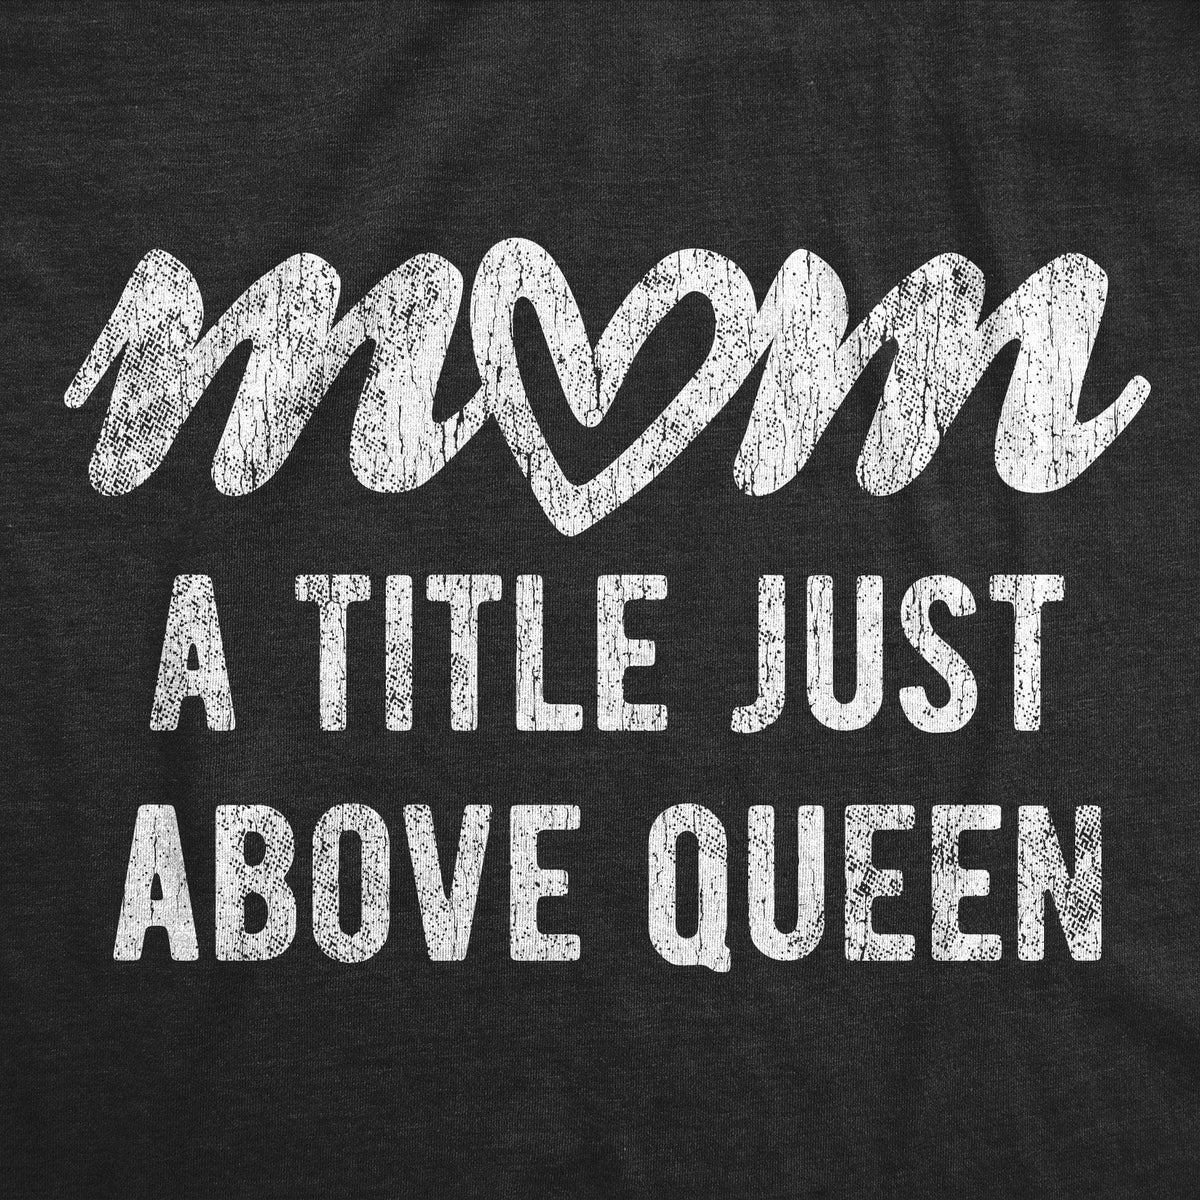 Mom A Title Just Above Queen Women&#39;s Tshirt - Crazy Dog T-Shirts